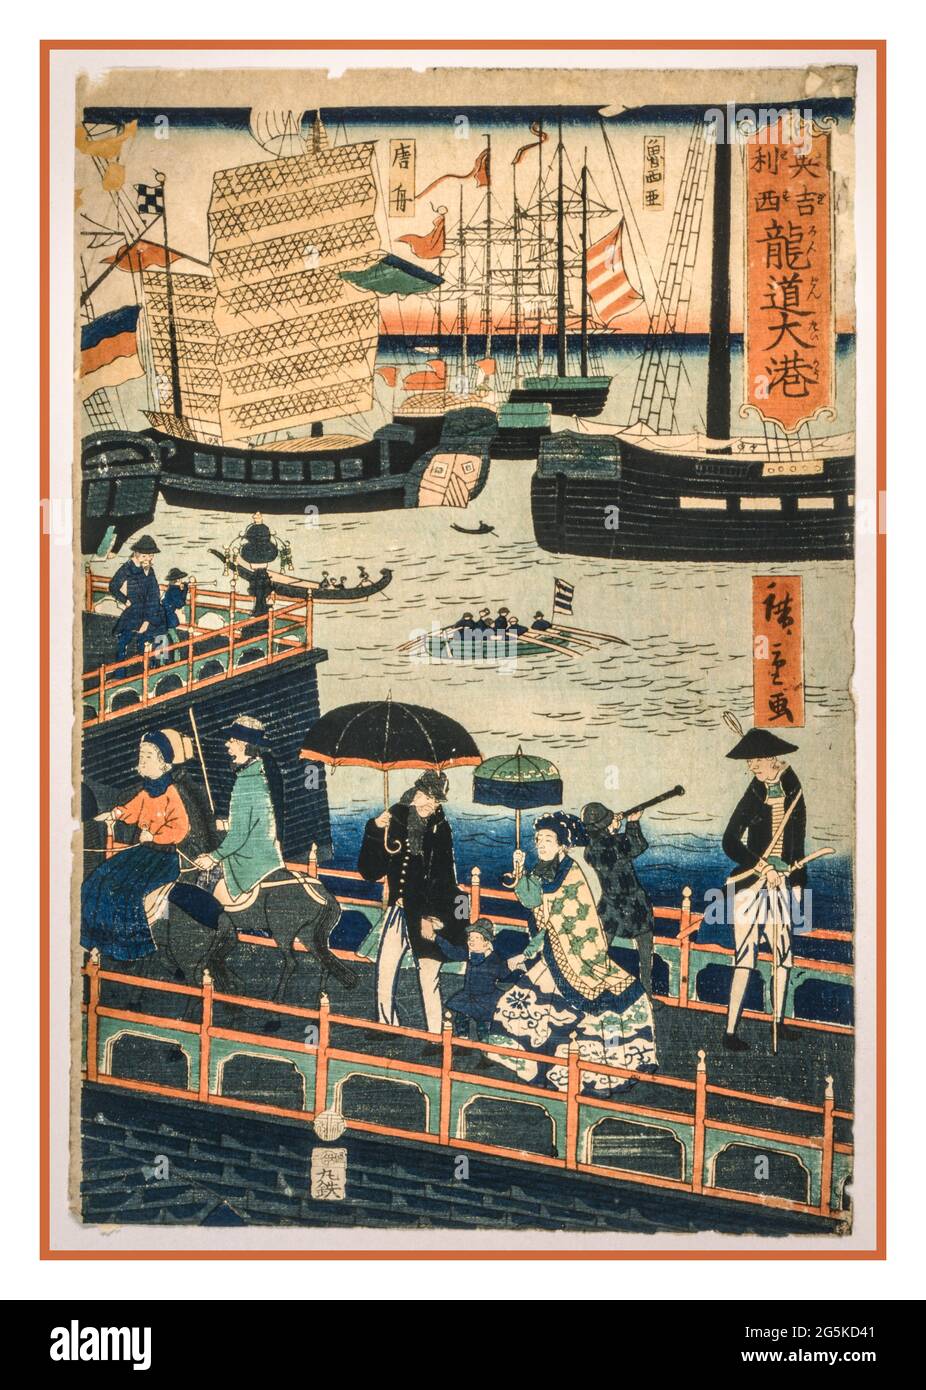 Utagawa Hiroshige, 1826-1869, artist rondon taikō Japanese triptych (one section only) print shows ships in a harbor with women and men walking and riding horses in the foreground. Japan : Marutetsu, 1868 Subject Headings -  Ships--England--London--1860-1870 -  Harbors--England--London--1860-1870 Headings Triptychs--Japanese--Color--1860-1870. Woodcuts--Japanese--Color--1860-1870. Signature: Hiroshige ga. Seal date: Dragon 10. created by either Hiroshige II or Hiroshige Stock Photo